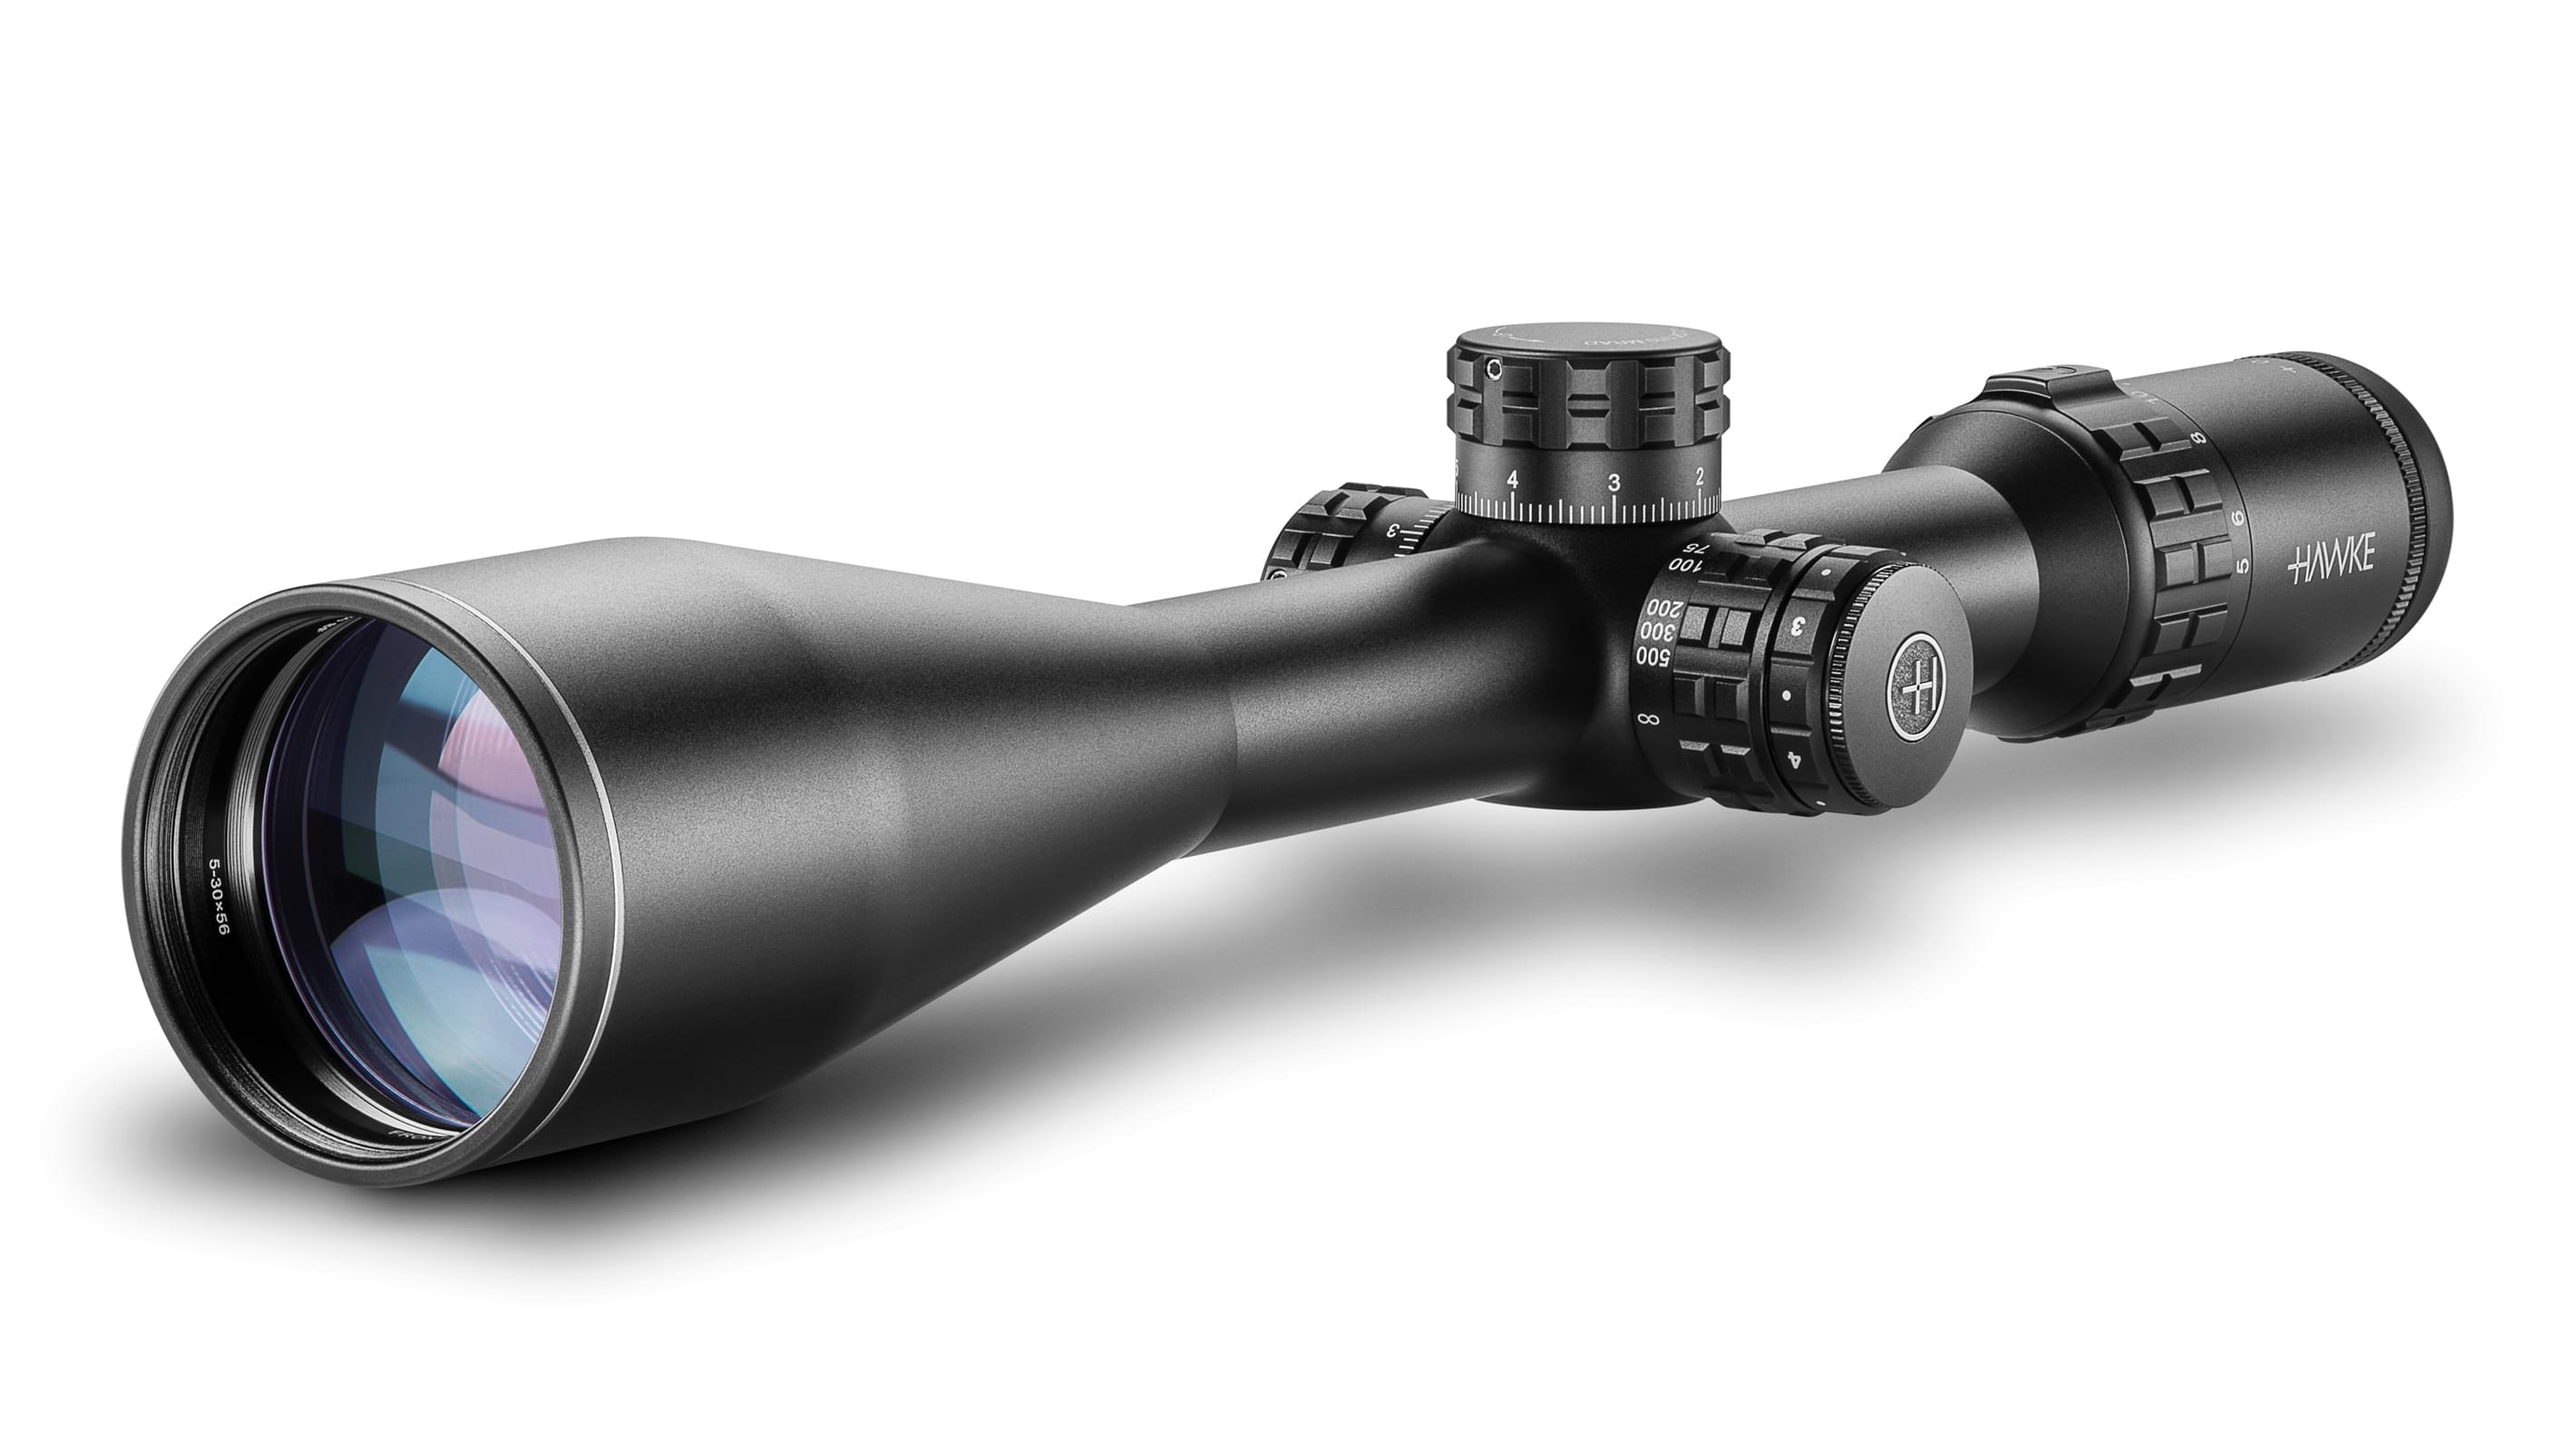 Objective End View Of The Hawke Frontier 30 SF 5-30x56 Mil Pro Rifle Scope